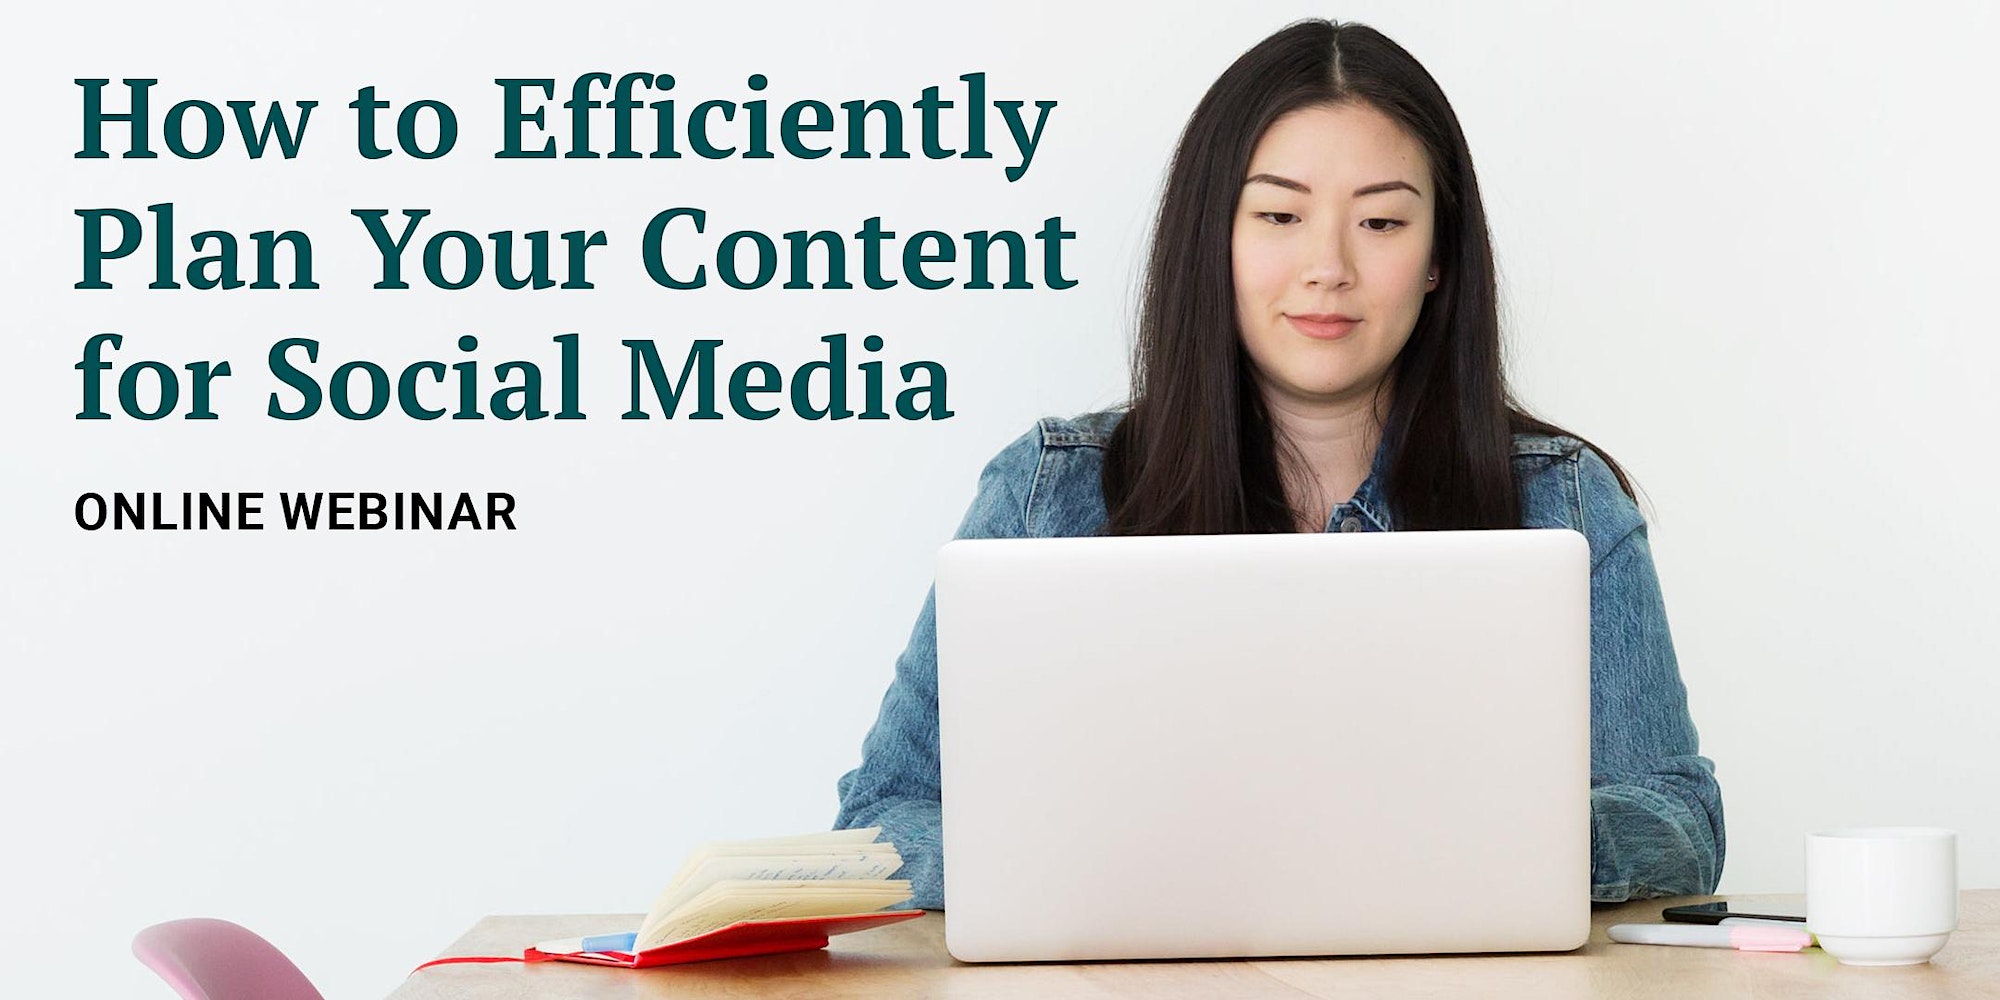 How to Efficiently Plan Your Content for Social Media: Online Webinar